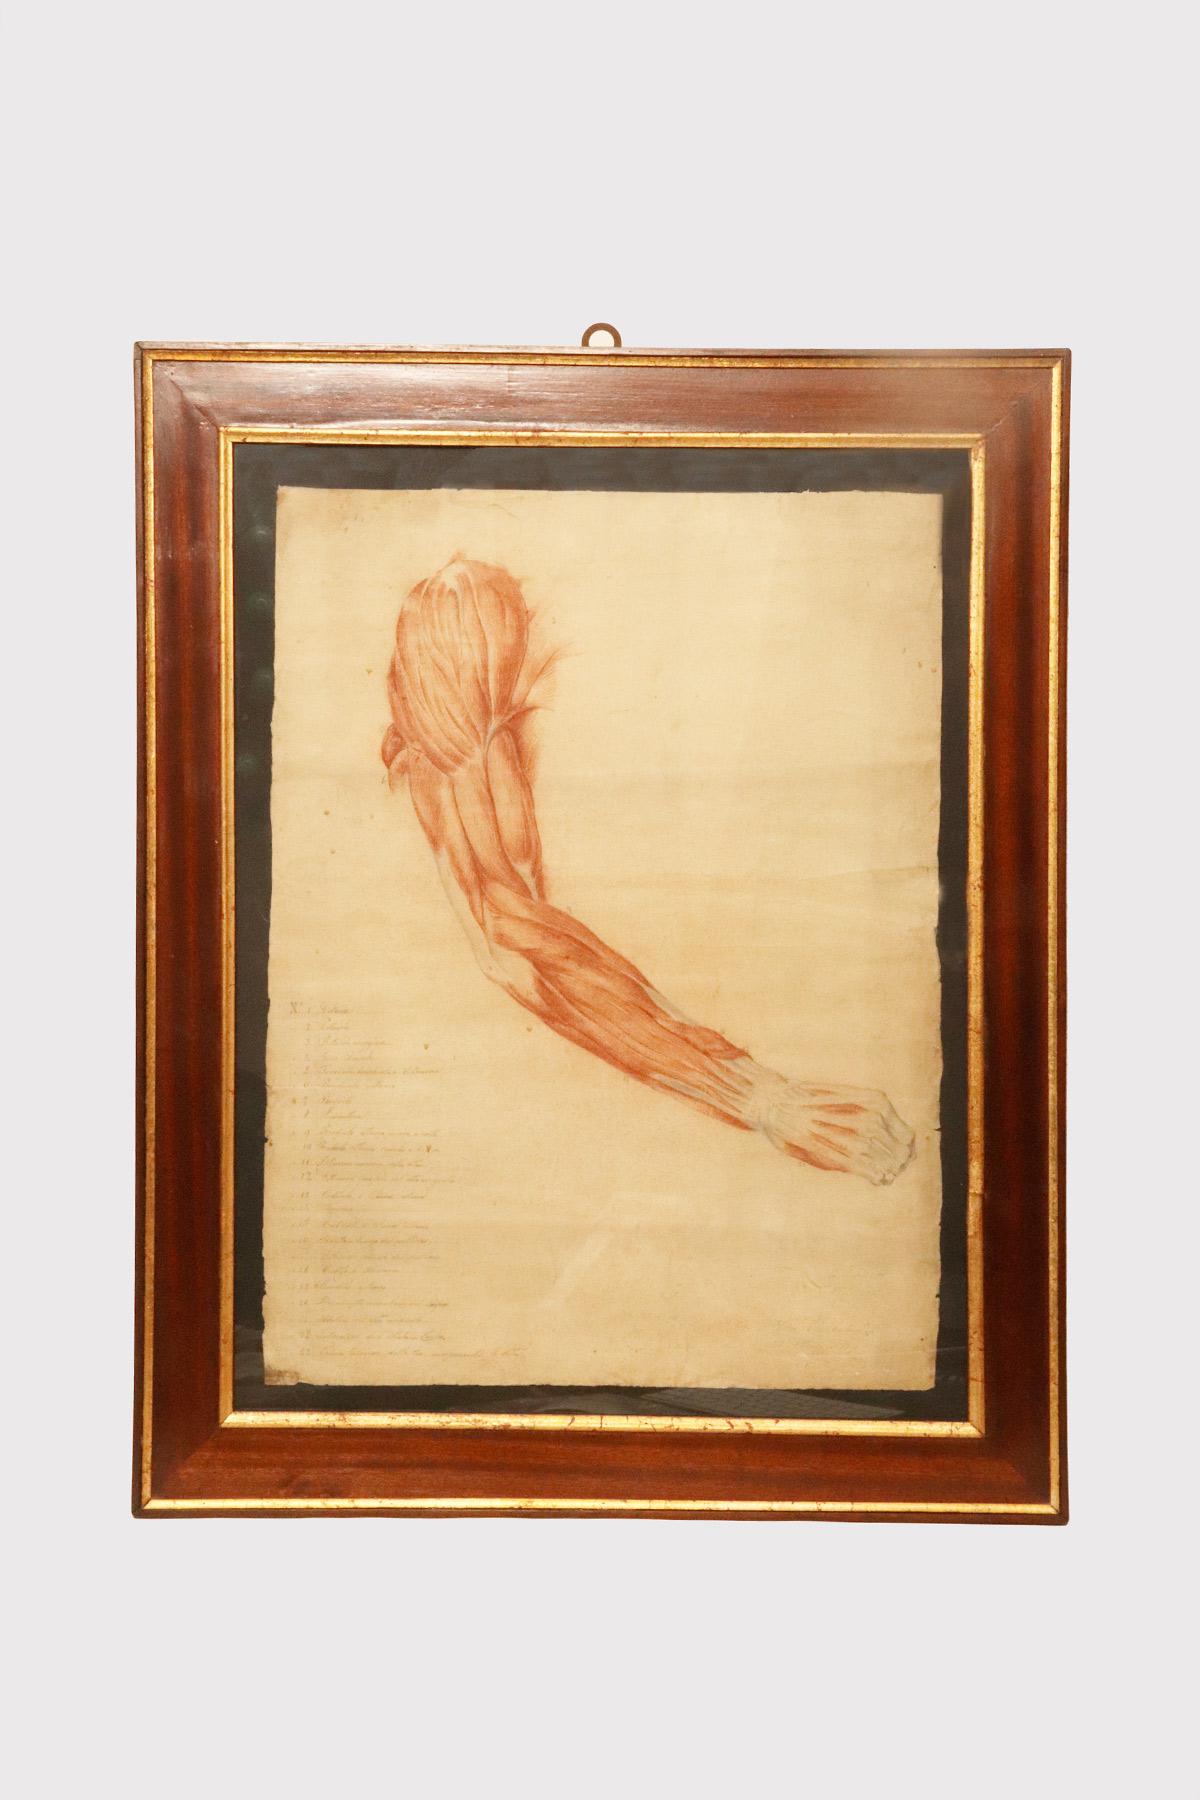 A painting containing an ancient anatomical drawing of an upper limb, made in pencil and sanguine. The contemporary frame, Empire style, made of wood, veneered in mahogany essence, enriched with gilded wood profiles. Iron hook. Signed Giovanni